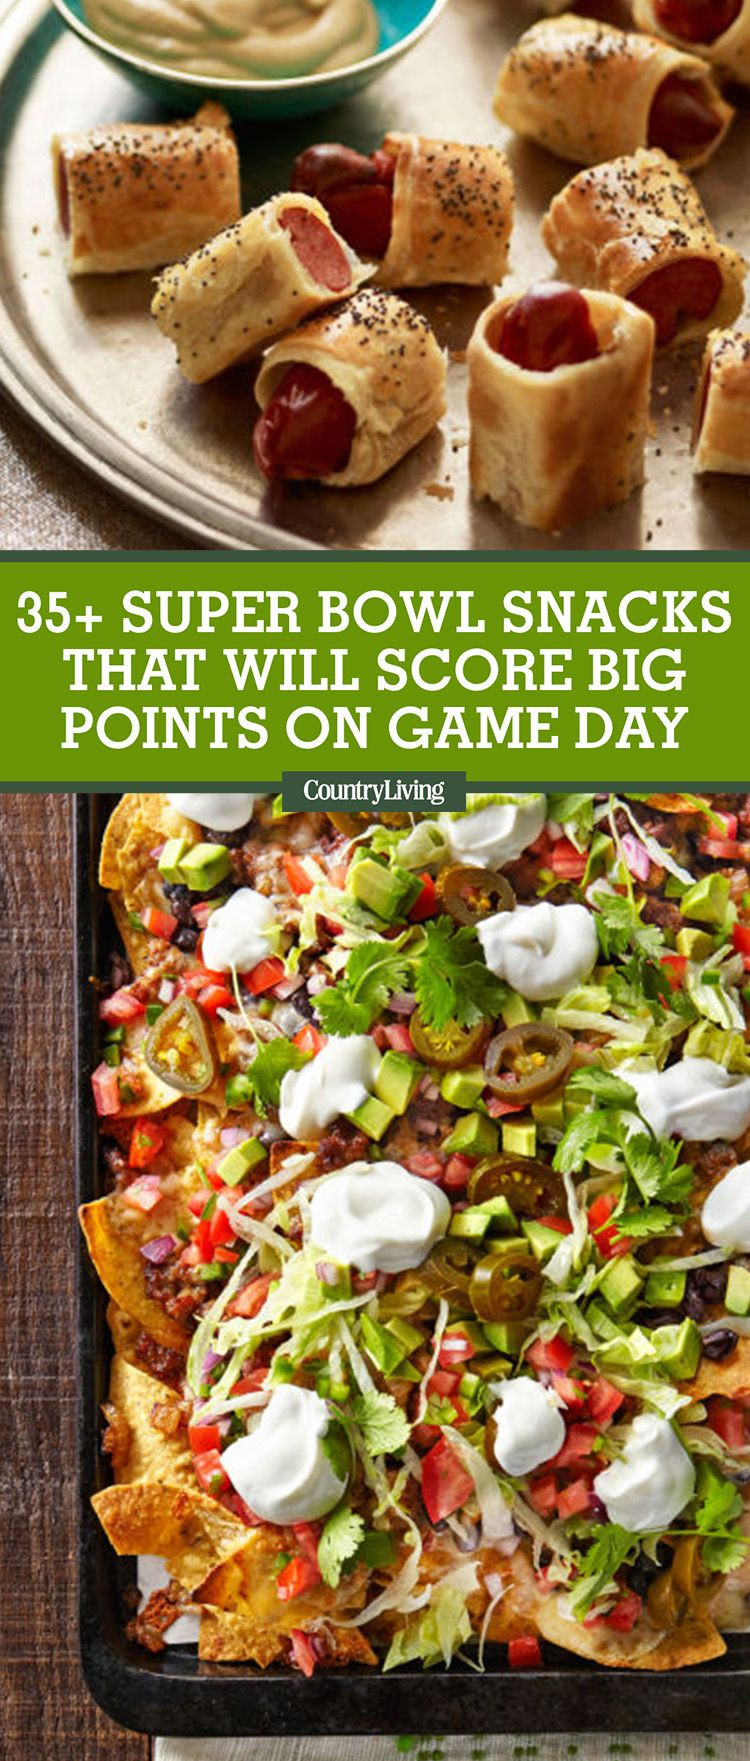 Super Bowl Healthy Appetizers
 Your Super Bowl Crowd Will Devour These Delicious Game Day